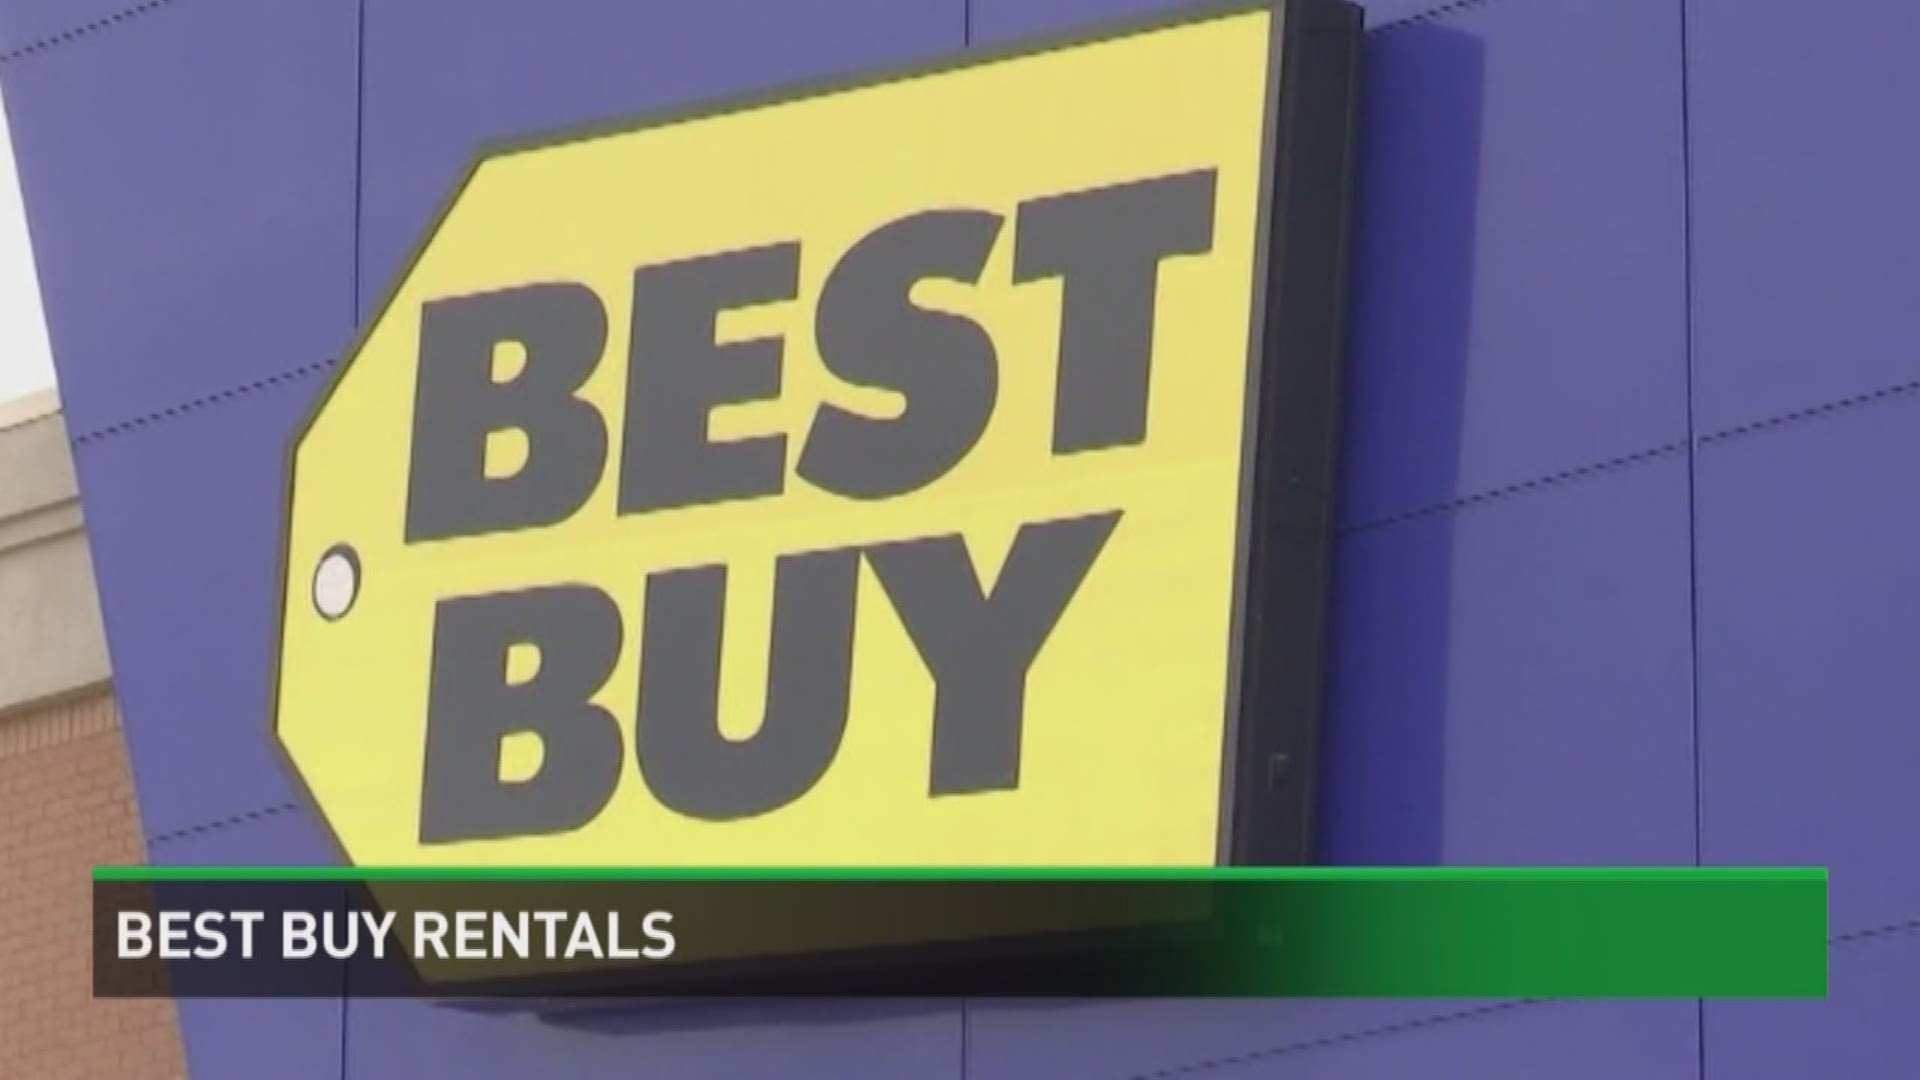 Best Buy is trying a new program intended to cut down on returns.